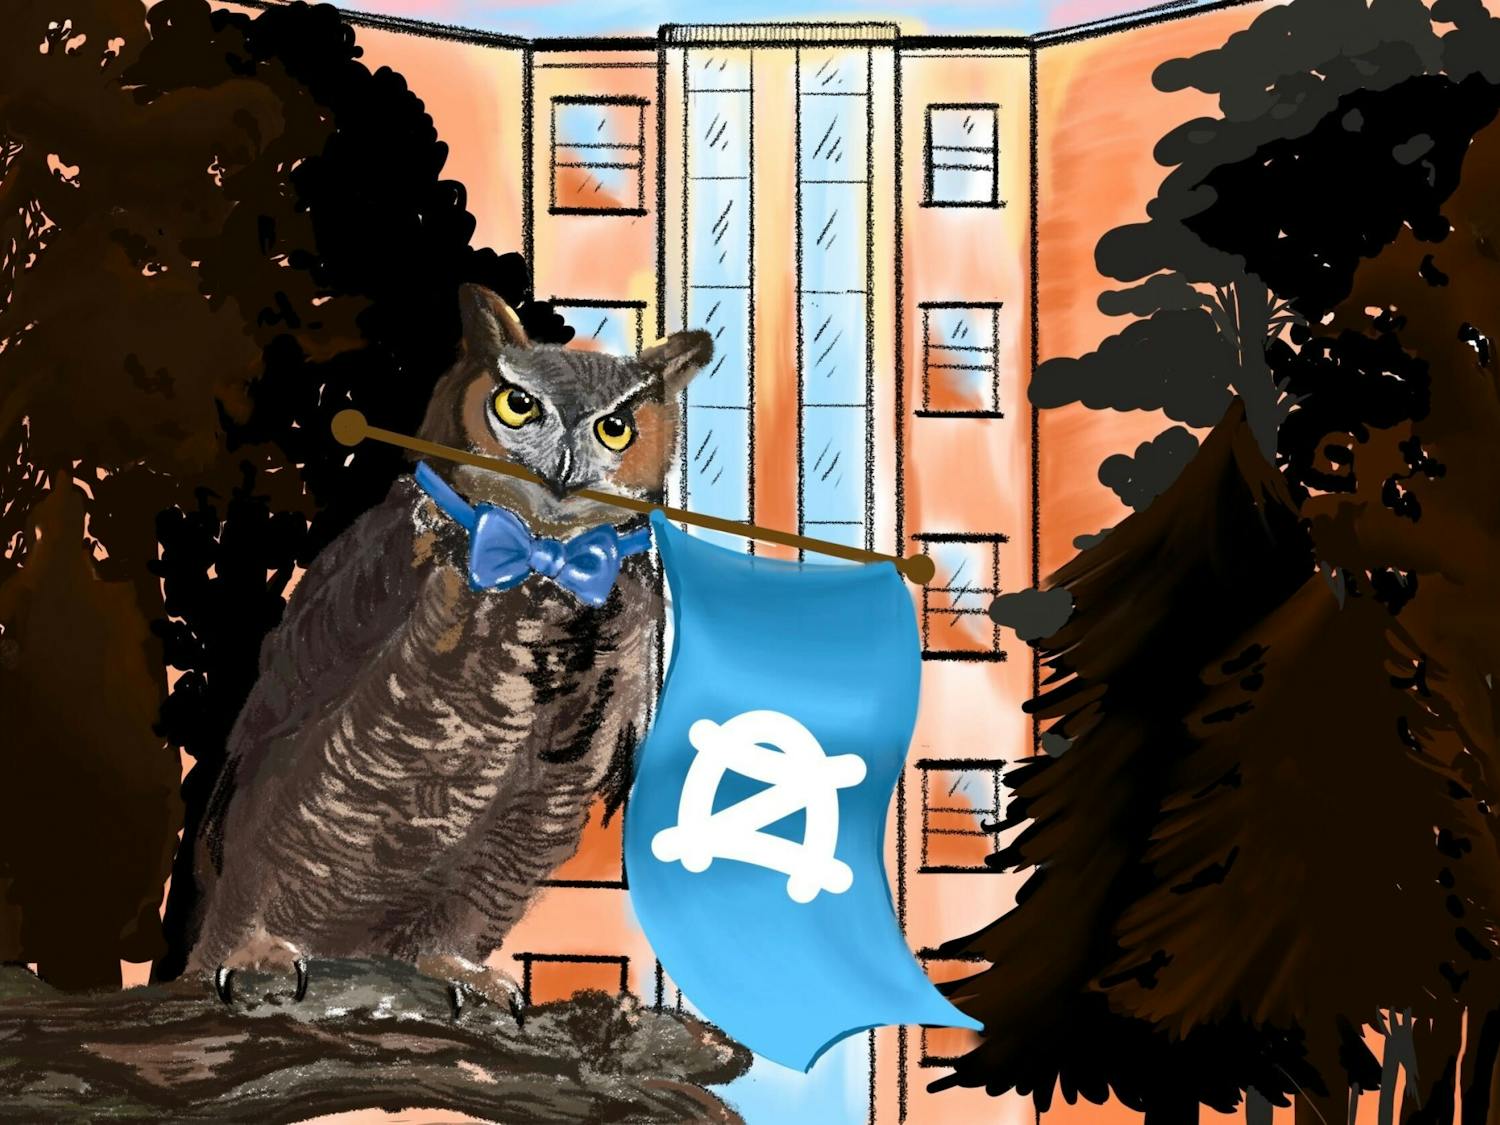 opinion-leave-the-owl-alone.jpg